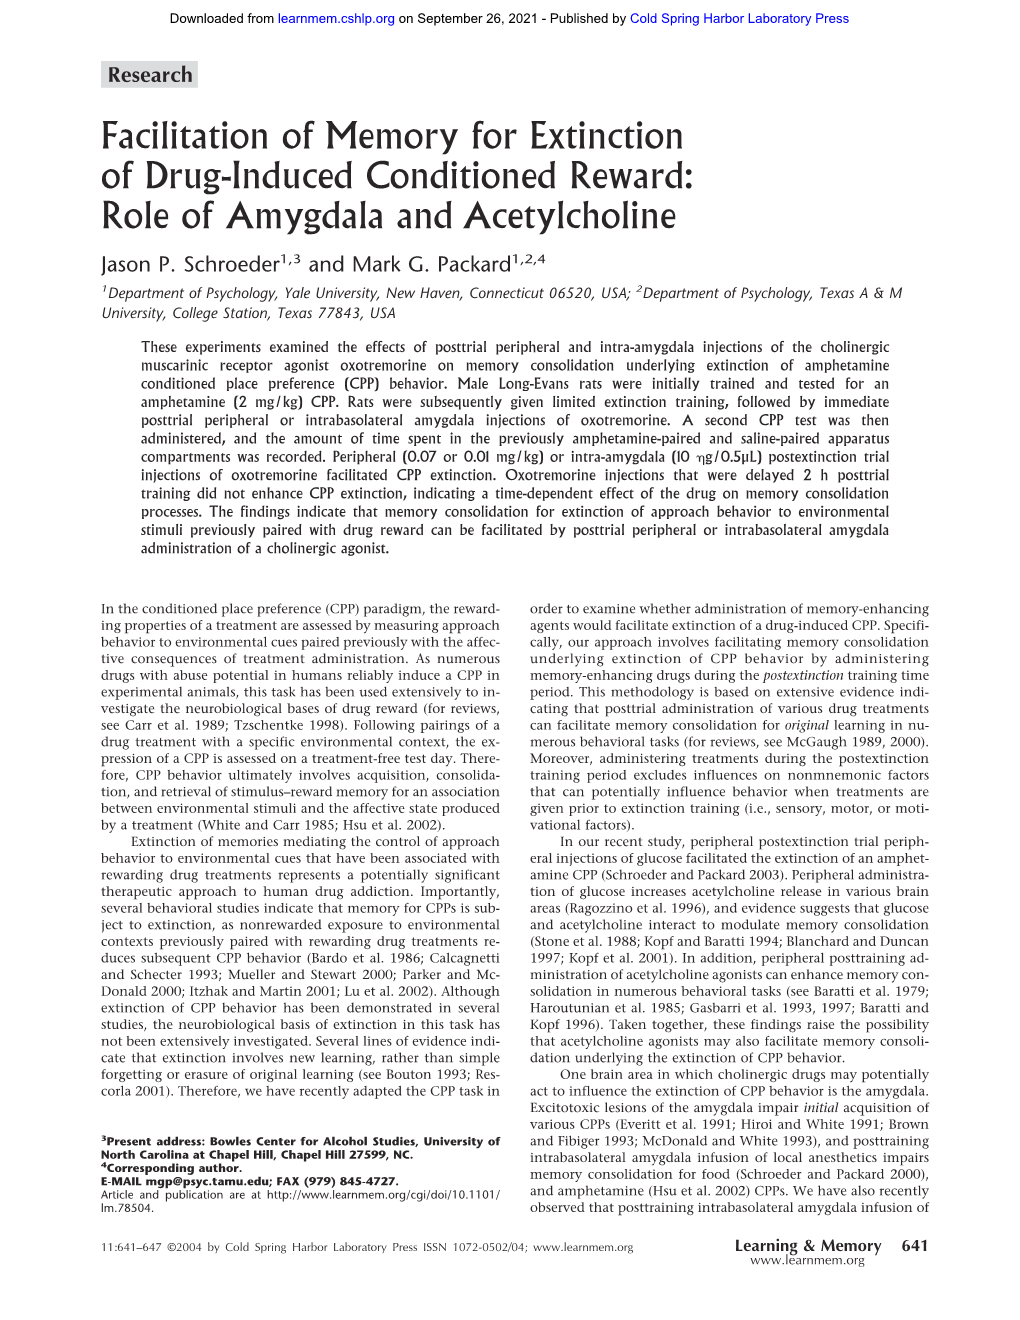 Facilitation of Memory for Extinction of Drug-Induced Conditioned Reward: Role of Amygdala and Acetylcholine Jason P